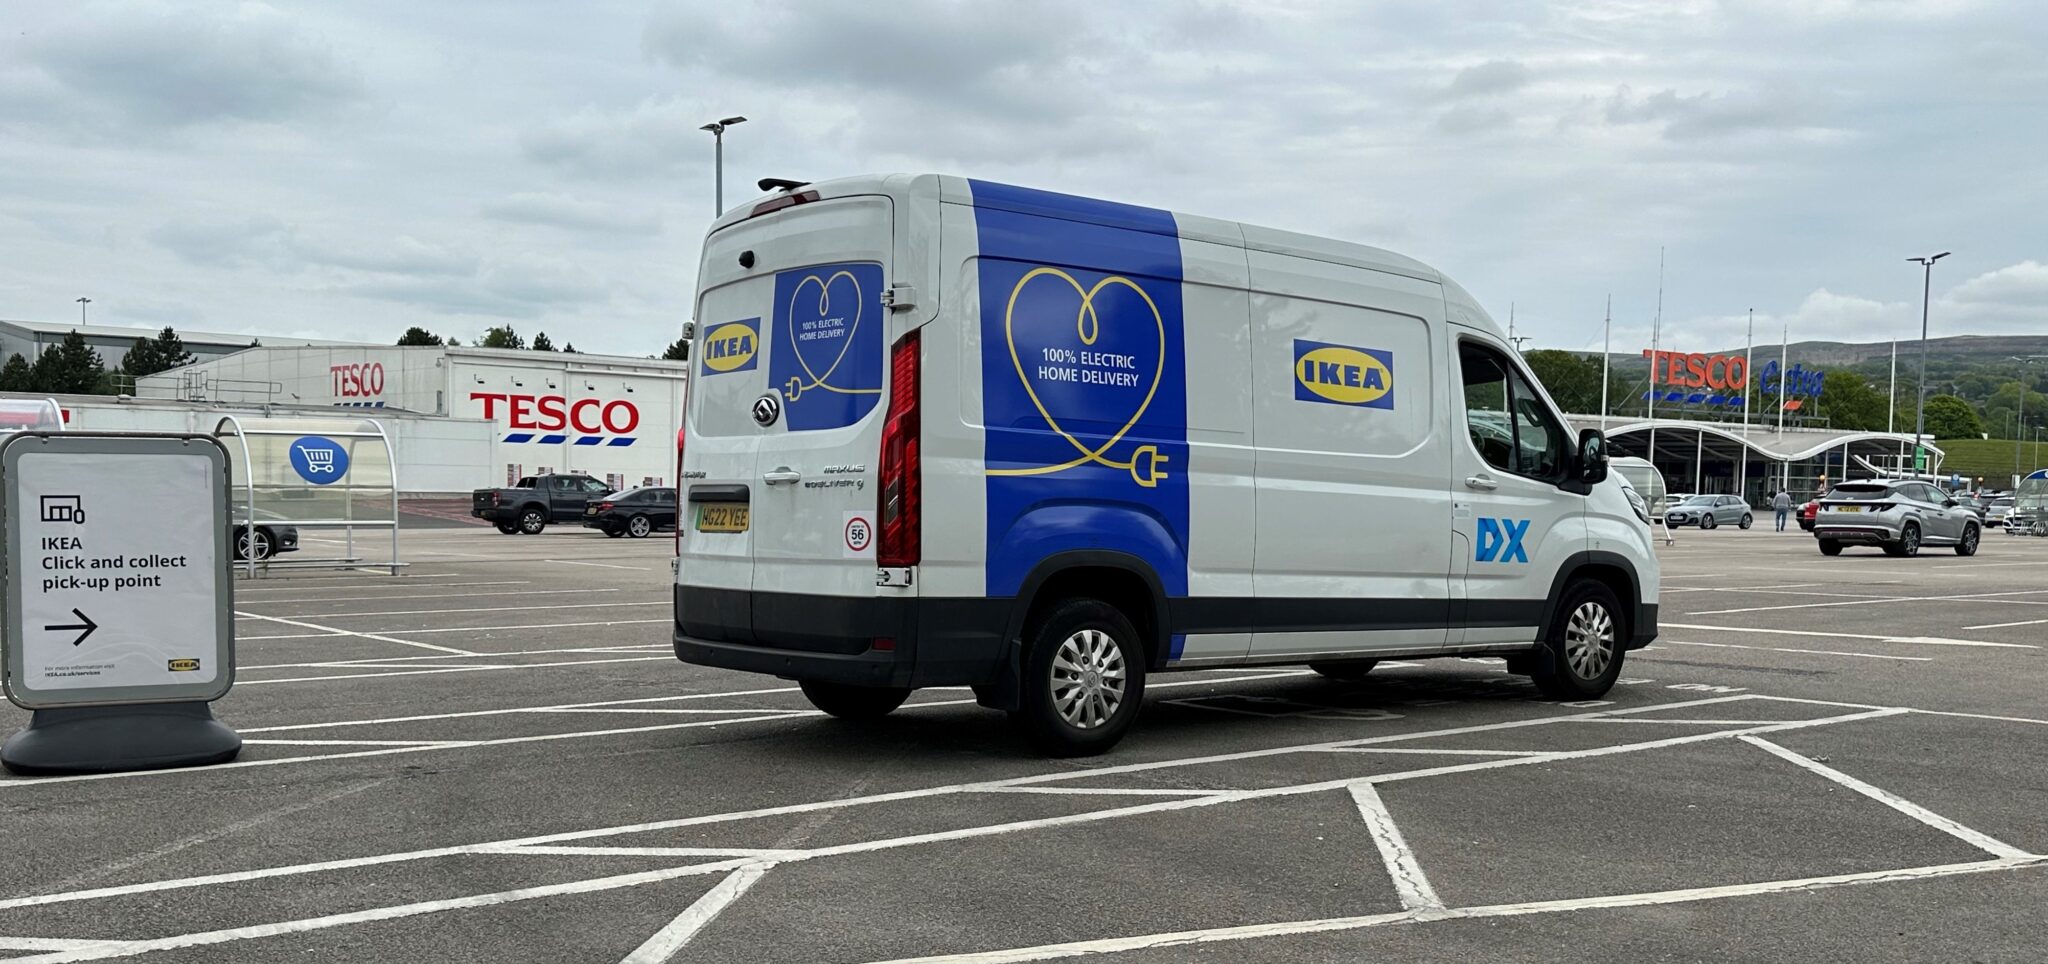 IKEA Mobile Pick Up Point 2048x964 